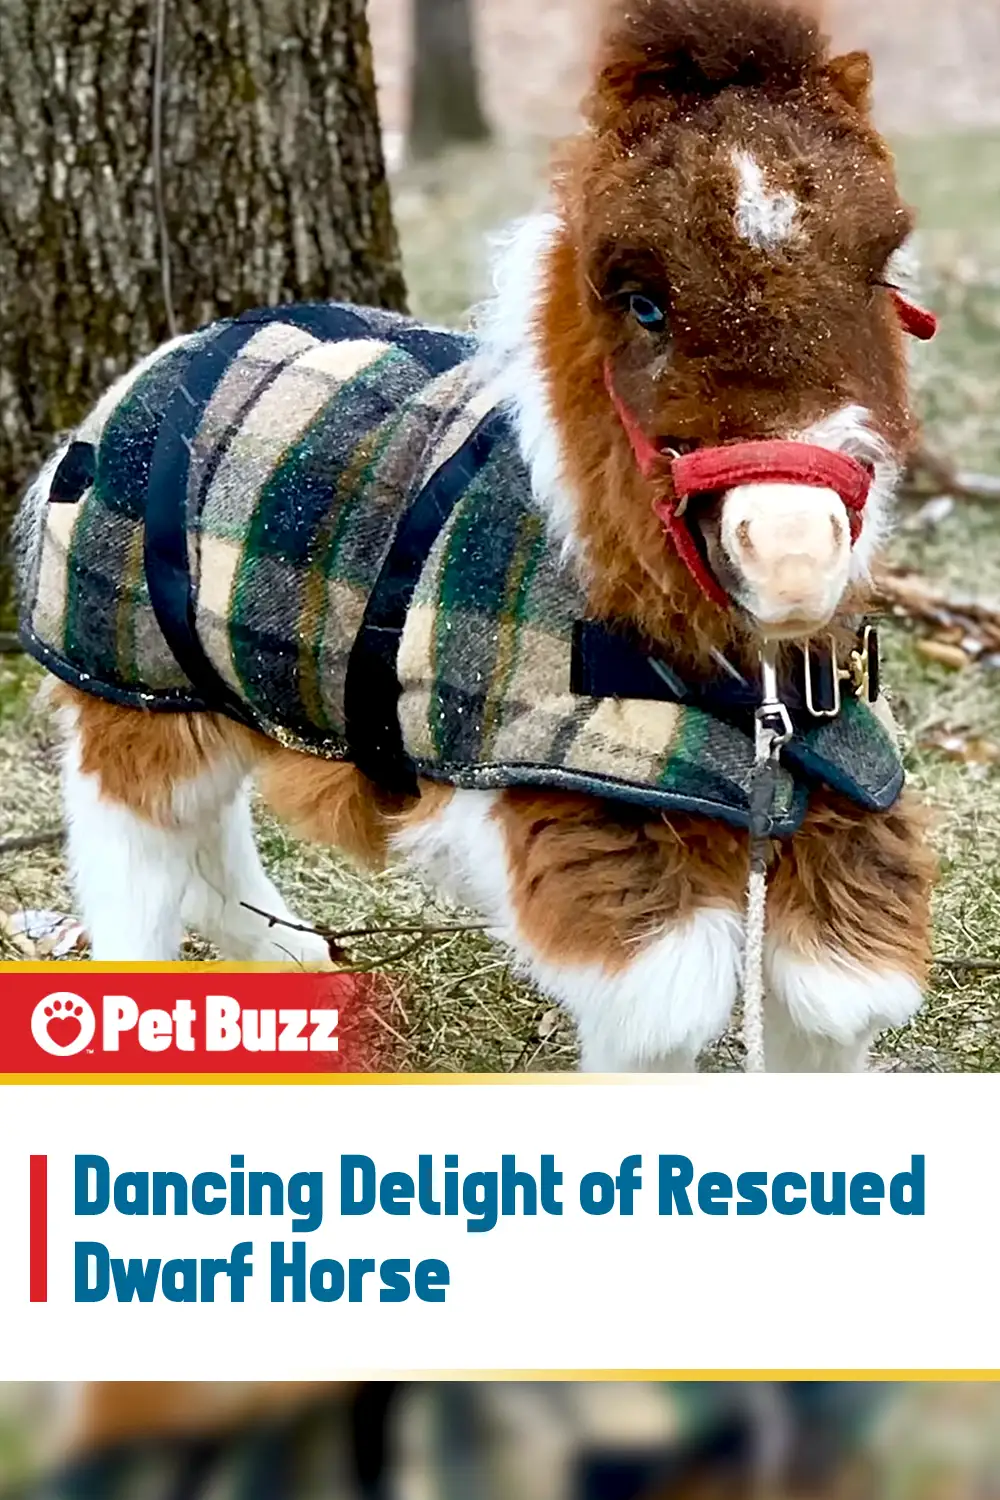 Dancing Delight of Rescued Dwarf Horse